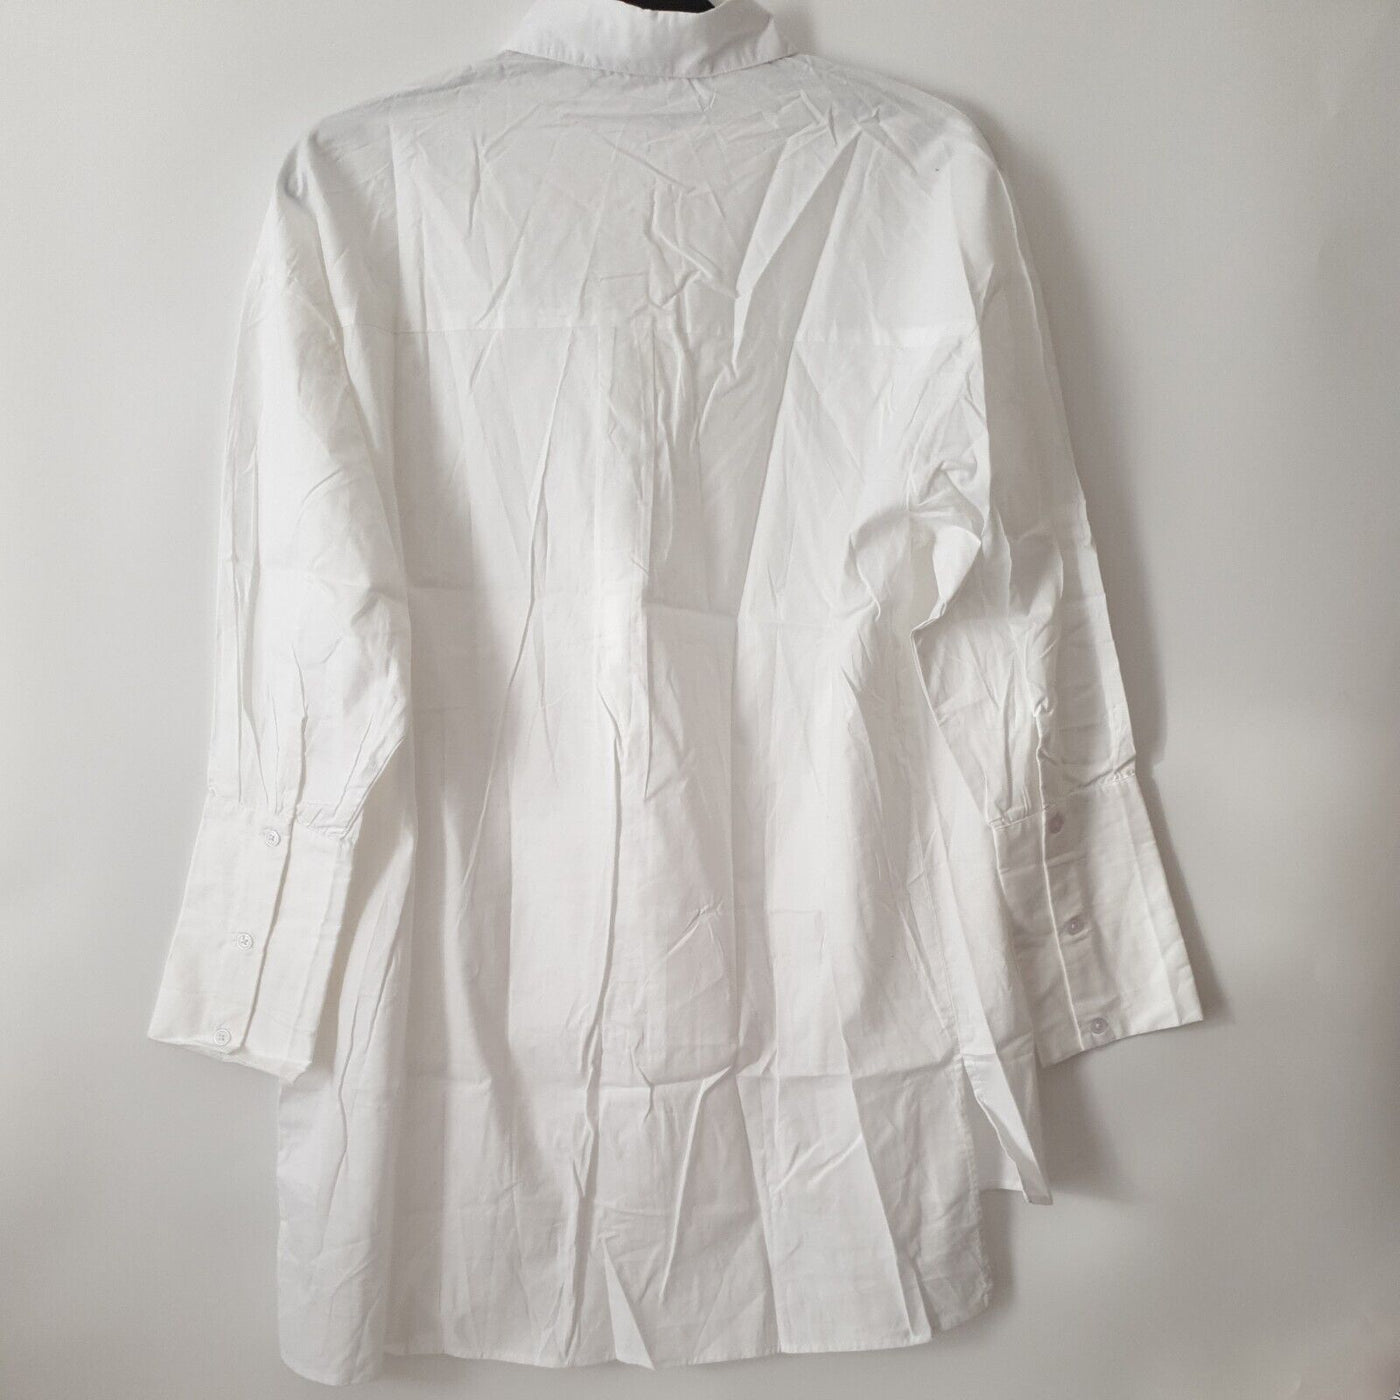 In The Style Lorna Luxe White Oversized Shirt Uk 12 ****Ref V369